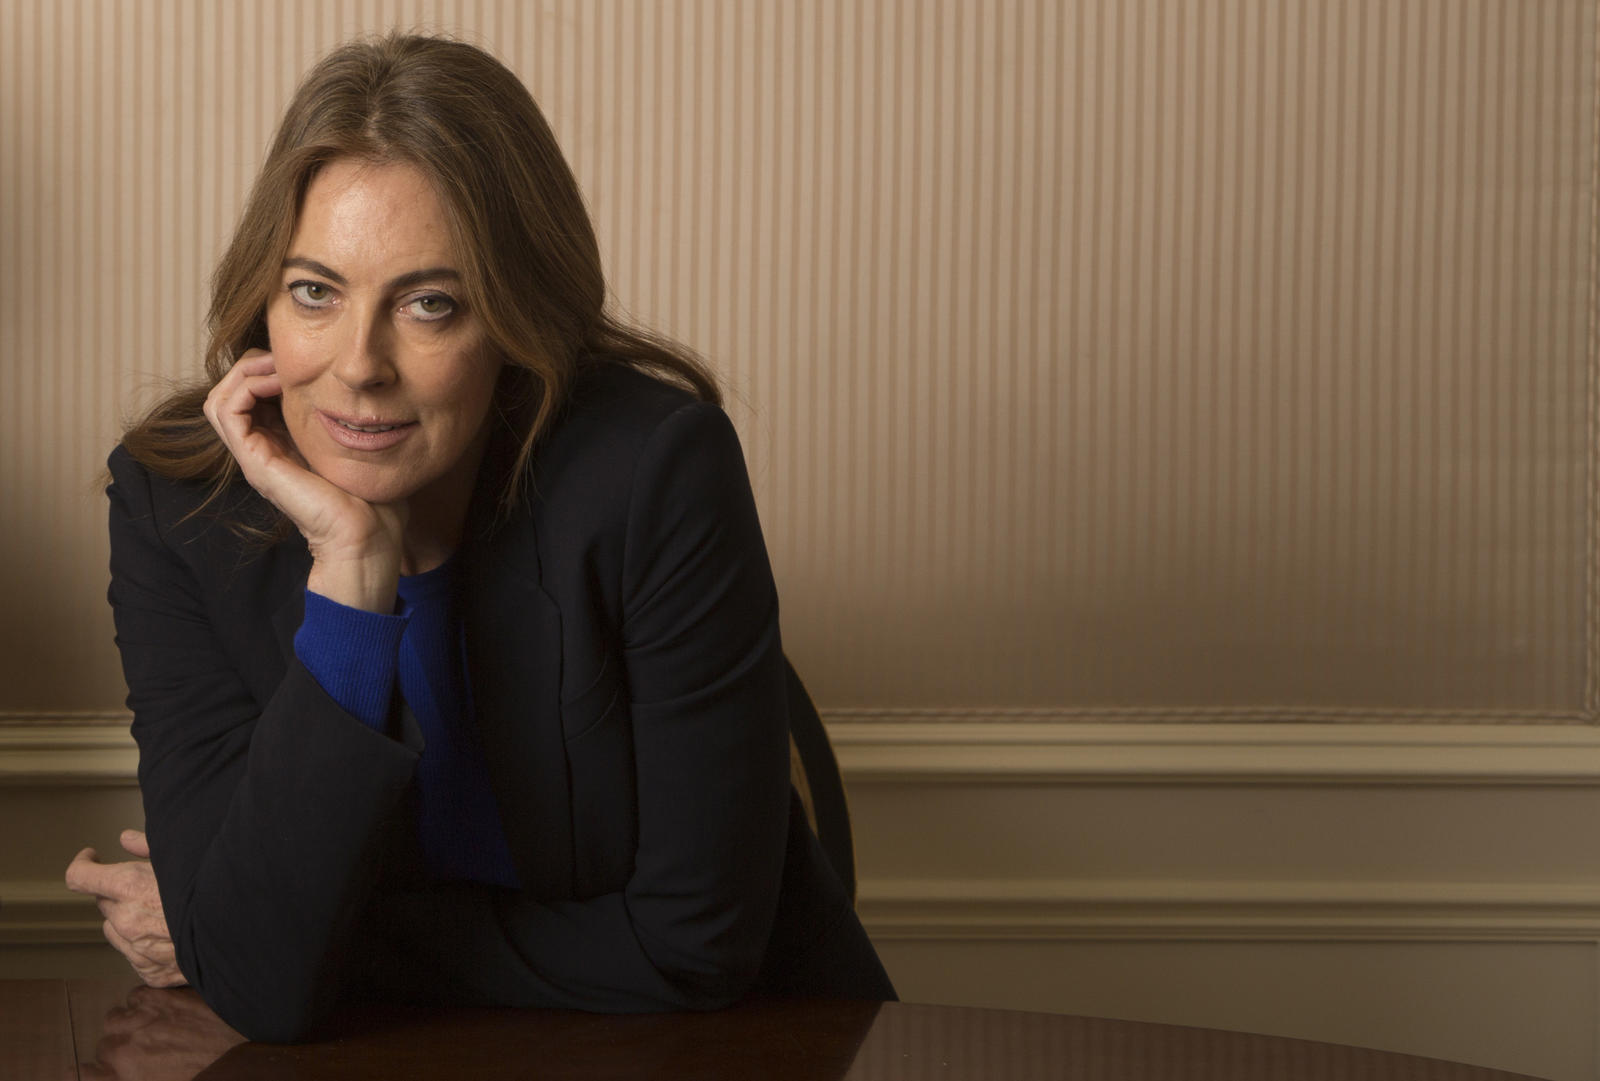 Director Kathryn Bigelow poses for her new film 'Zero Dark Thirty' in New York